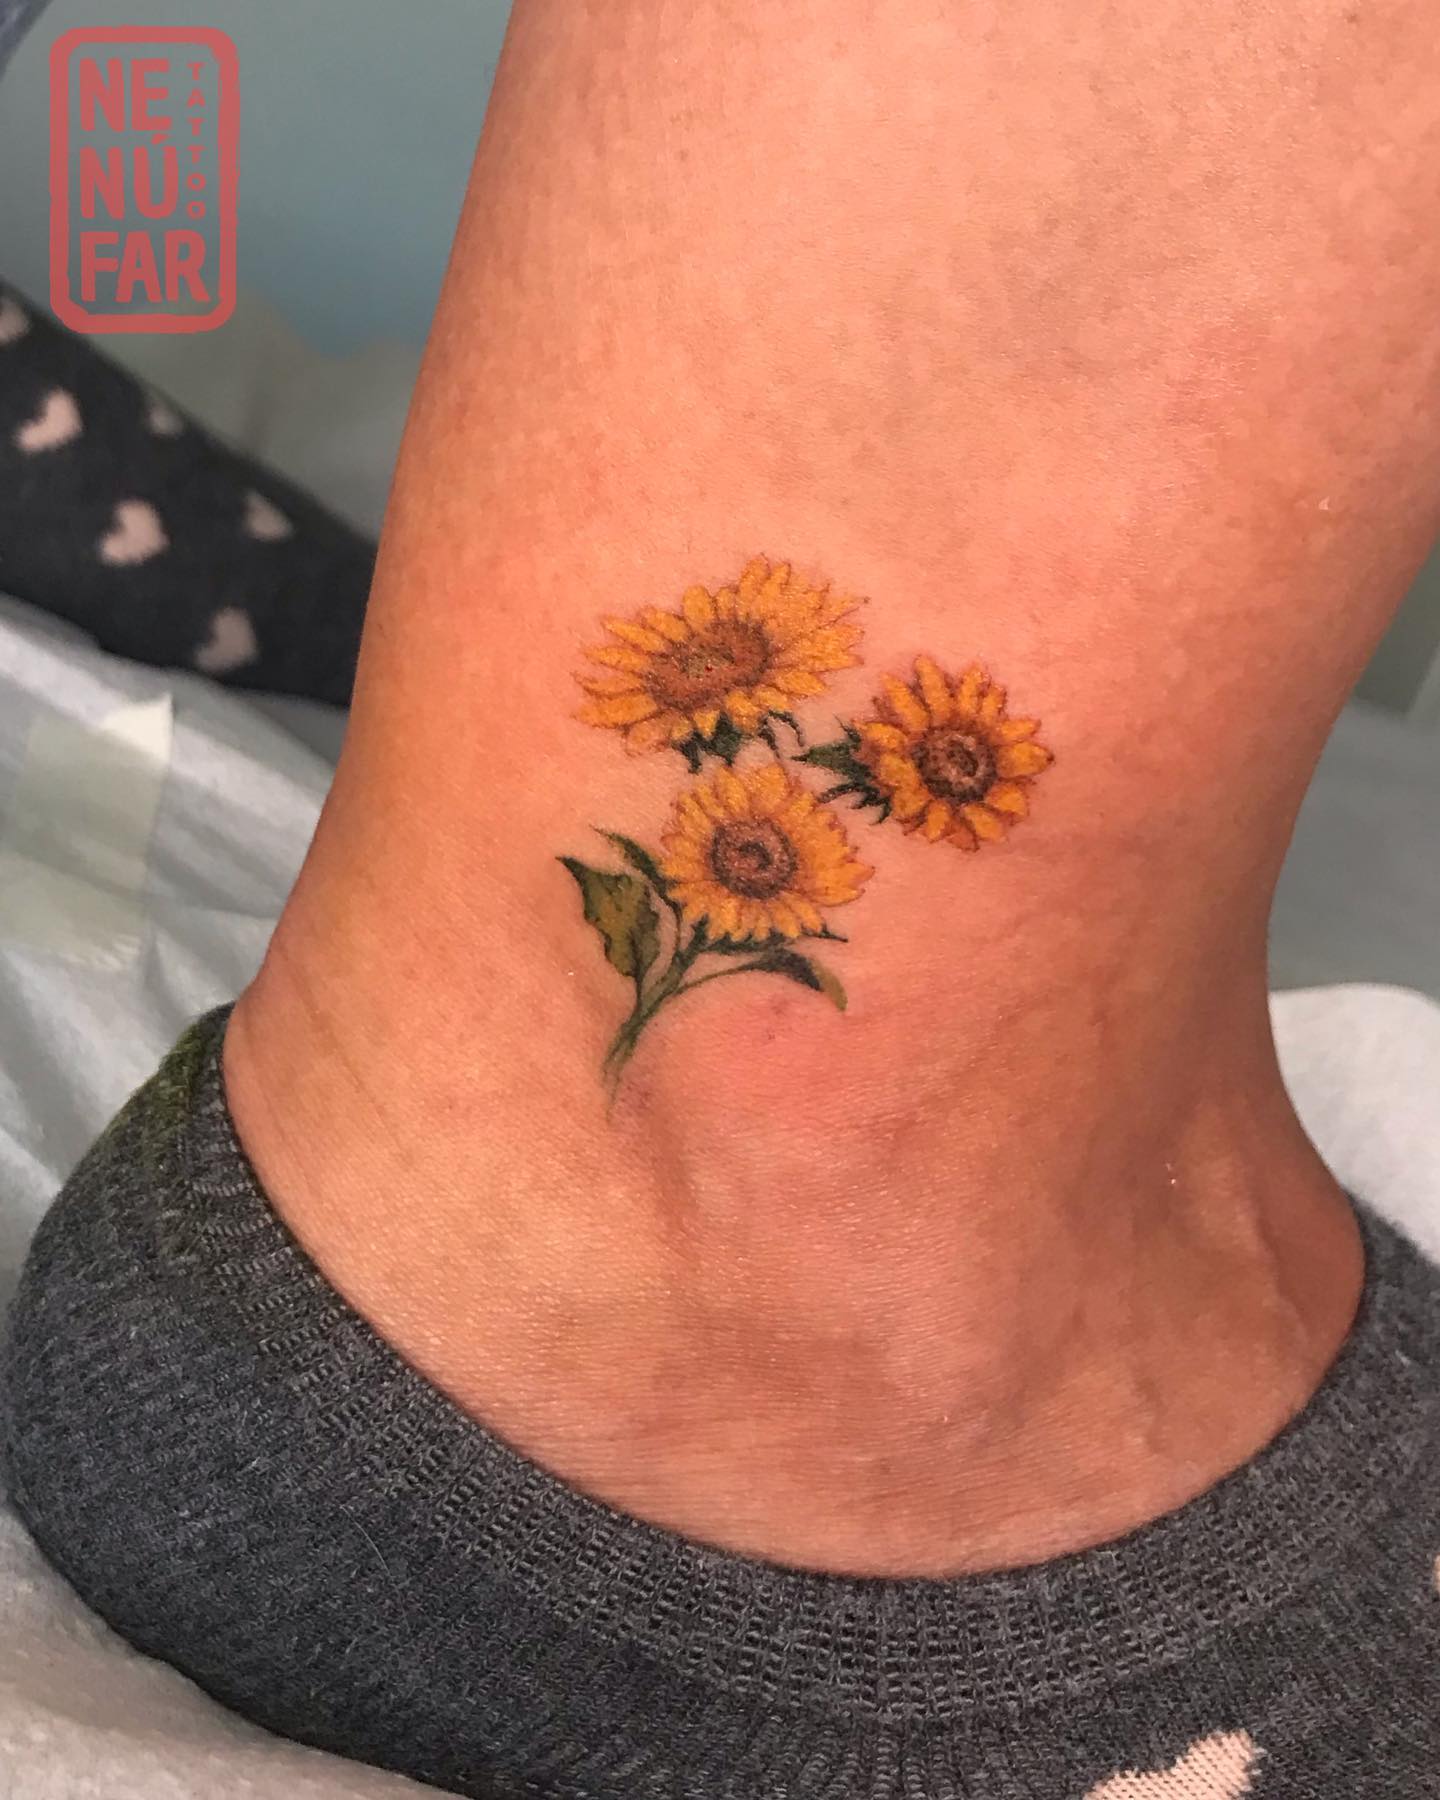 Black and White Sunflower Tattoo 2023  Blowing Ideas